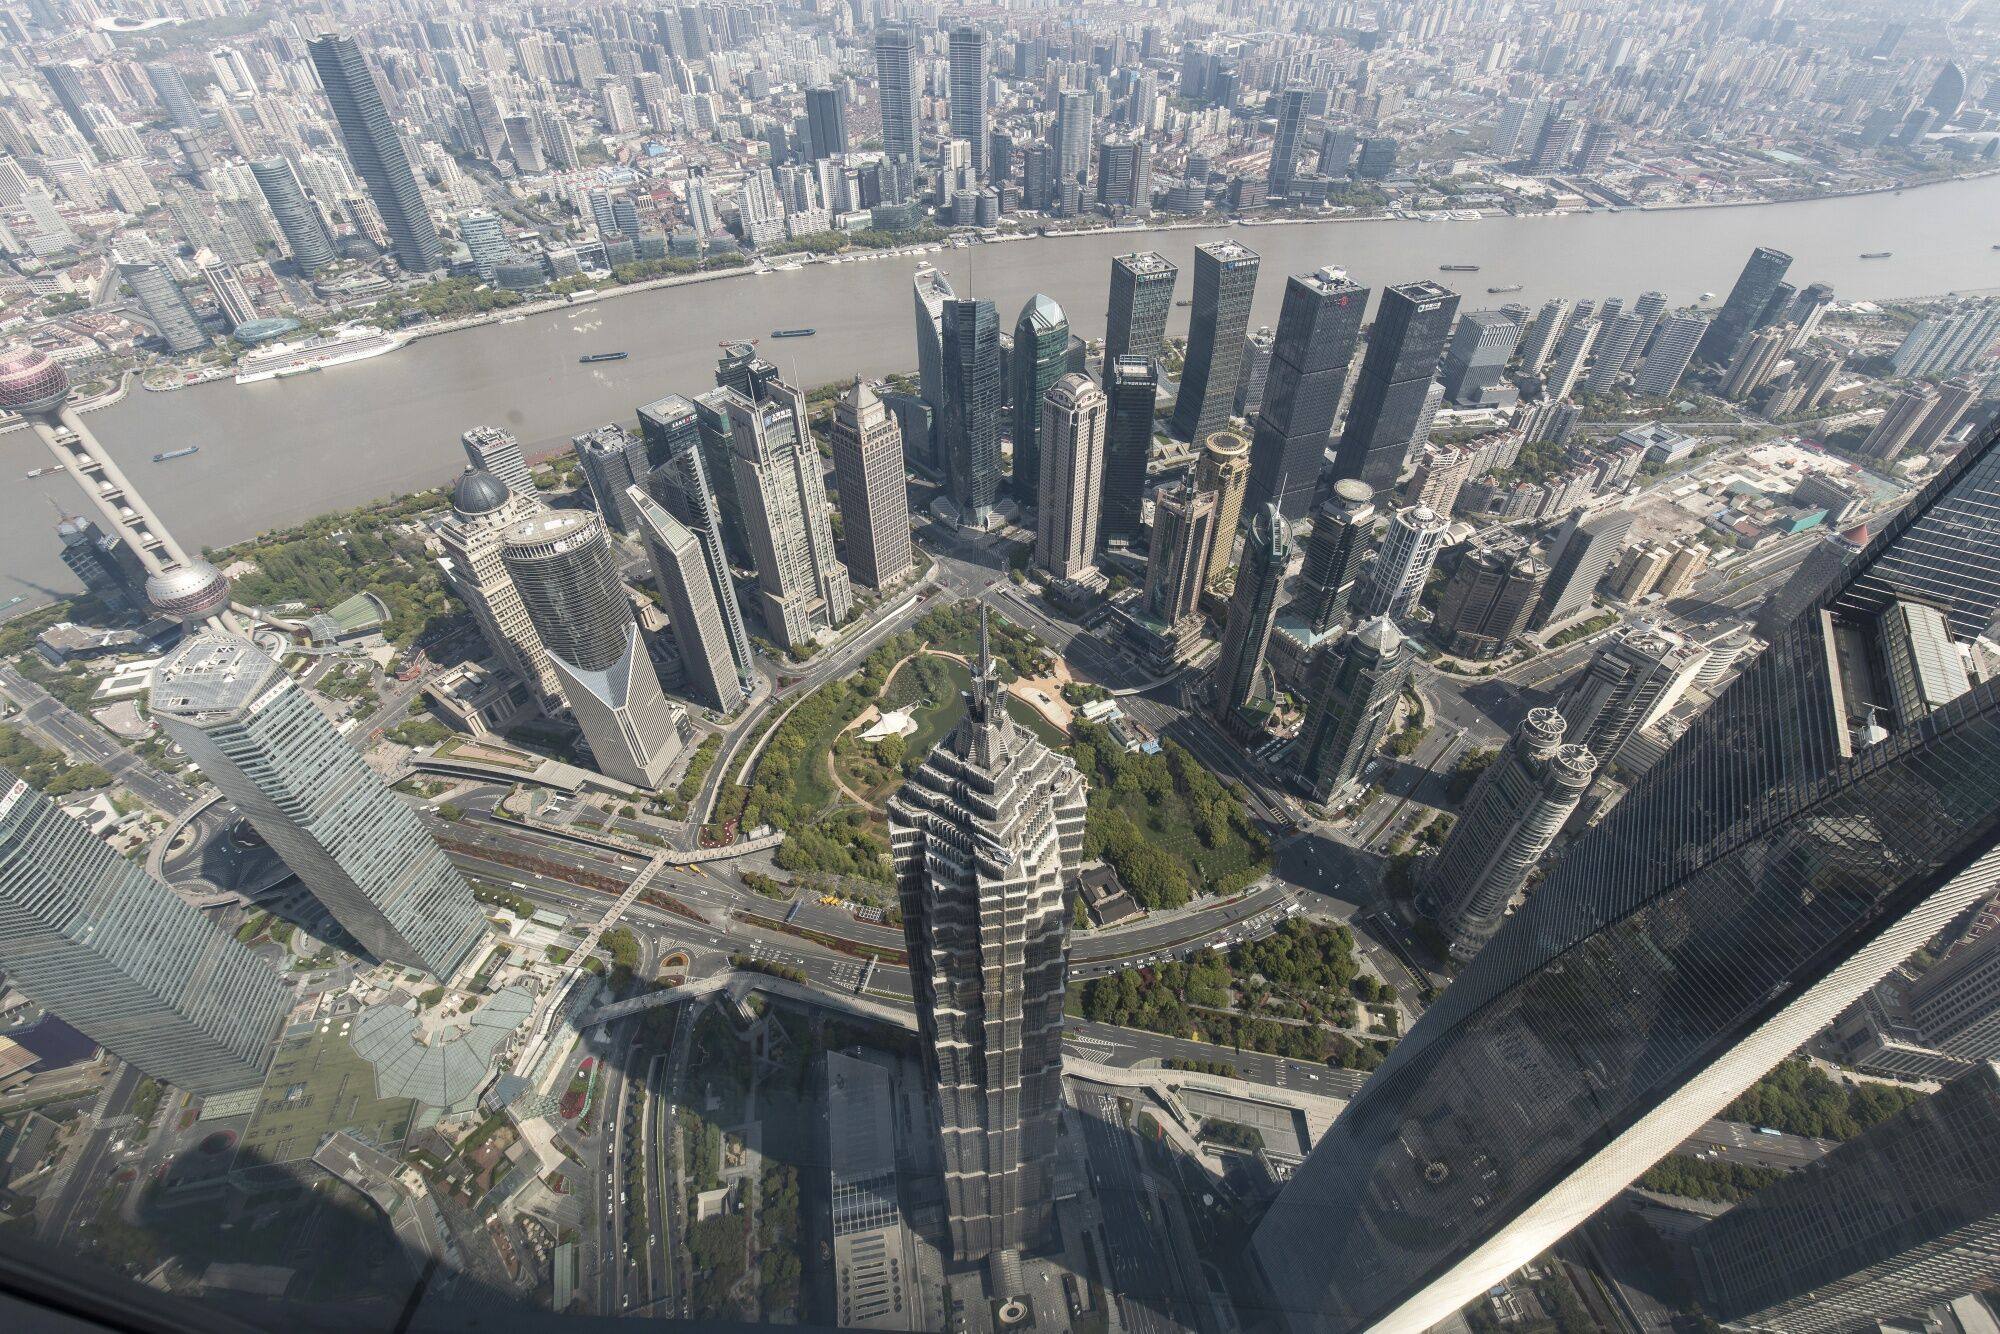 The Huangpu River in Shanghai. Swire’s offer adds to evidence that Hong Kong and overseas developers are now finding better chances of taking part in lucrative projects amid a property crisis in mainland China. Photo: Bloomberg